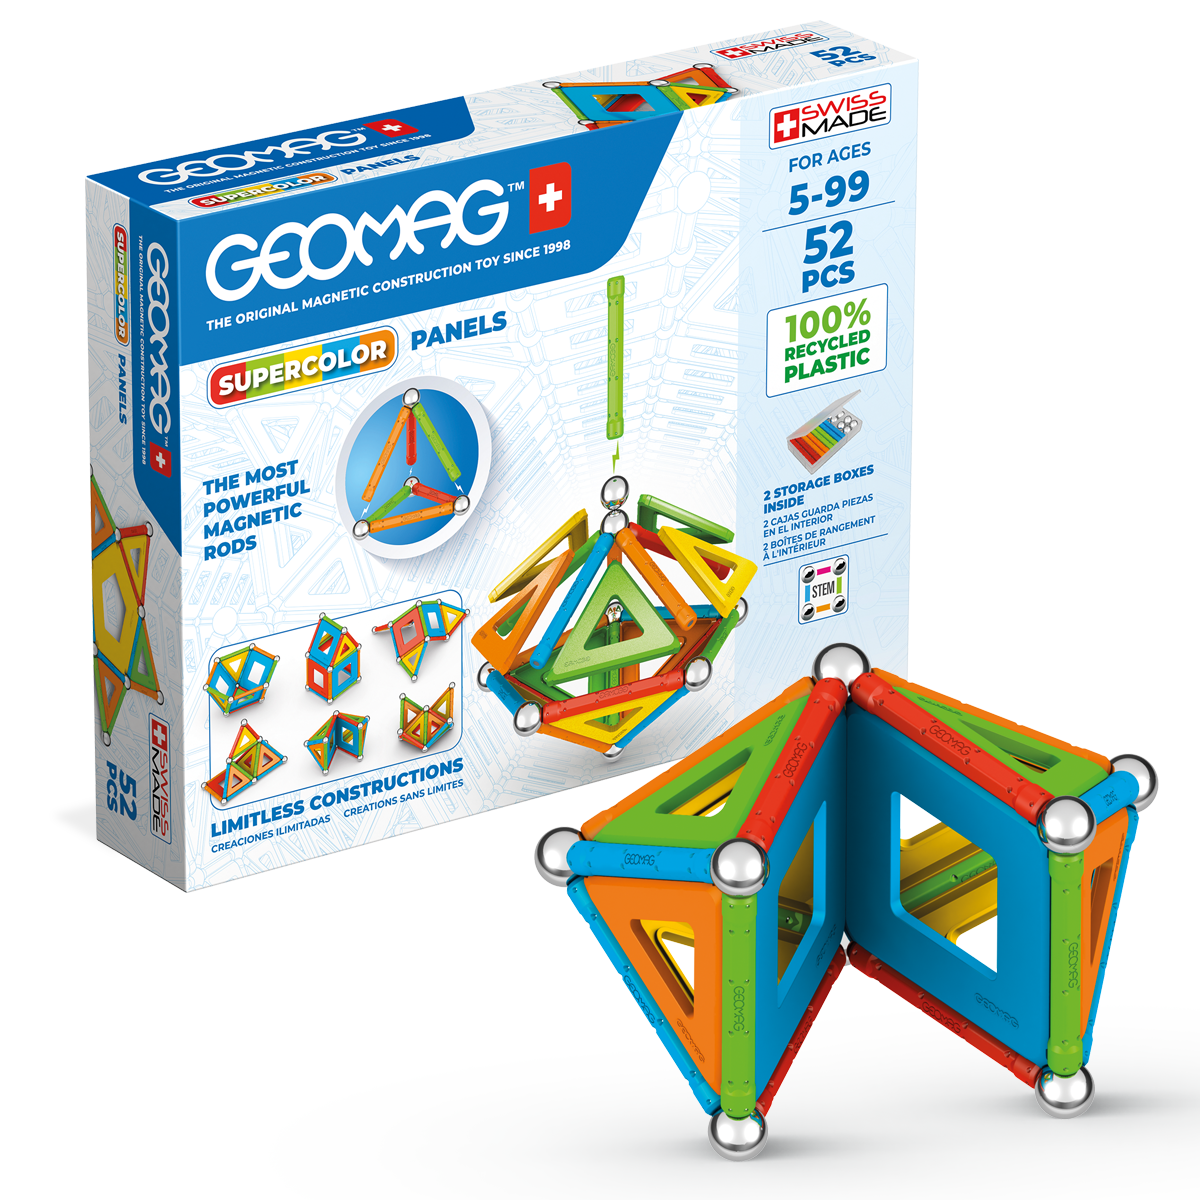 378 geomag supercolor panels recycled 52 pcs - Geomag